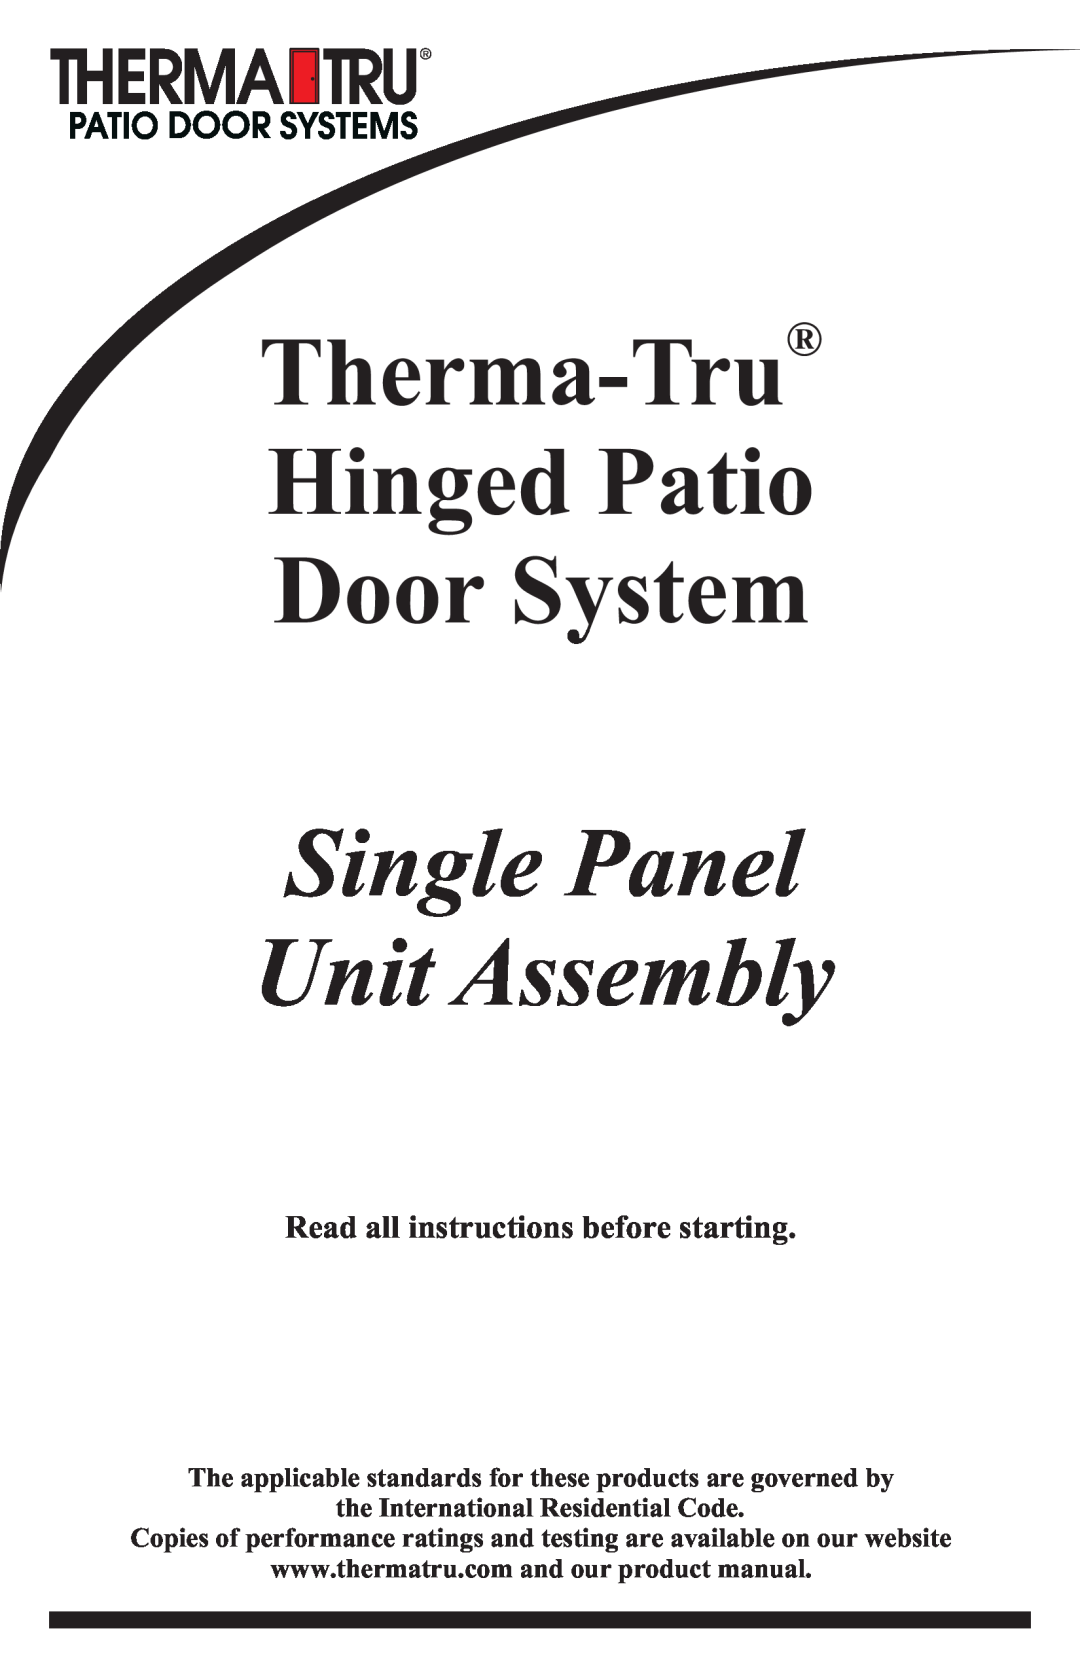 Therma-Tru Hinged Patio Door System Single Panel Assembly Unit manual Read all instructions before starting 